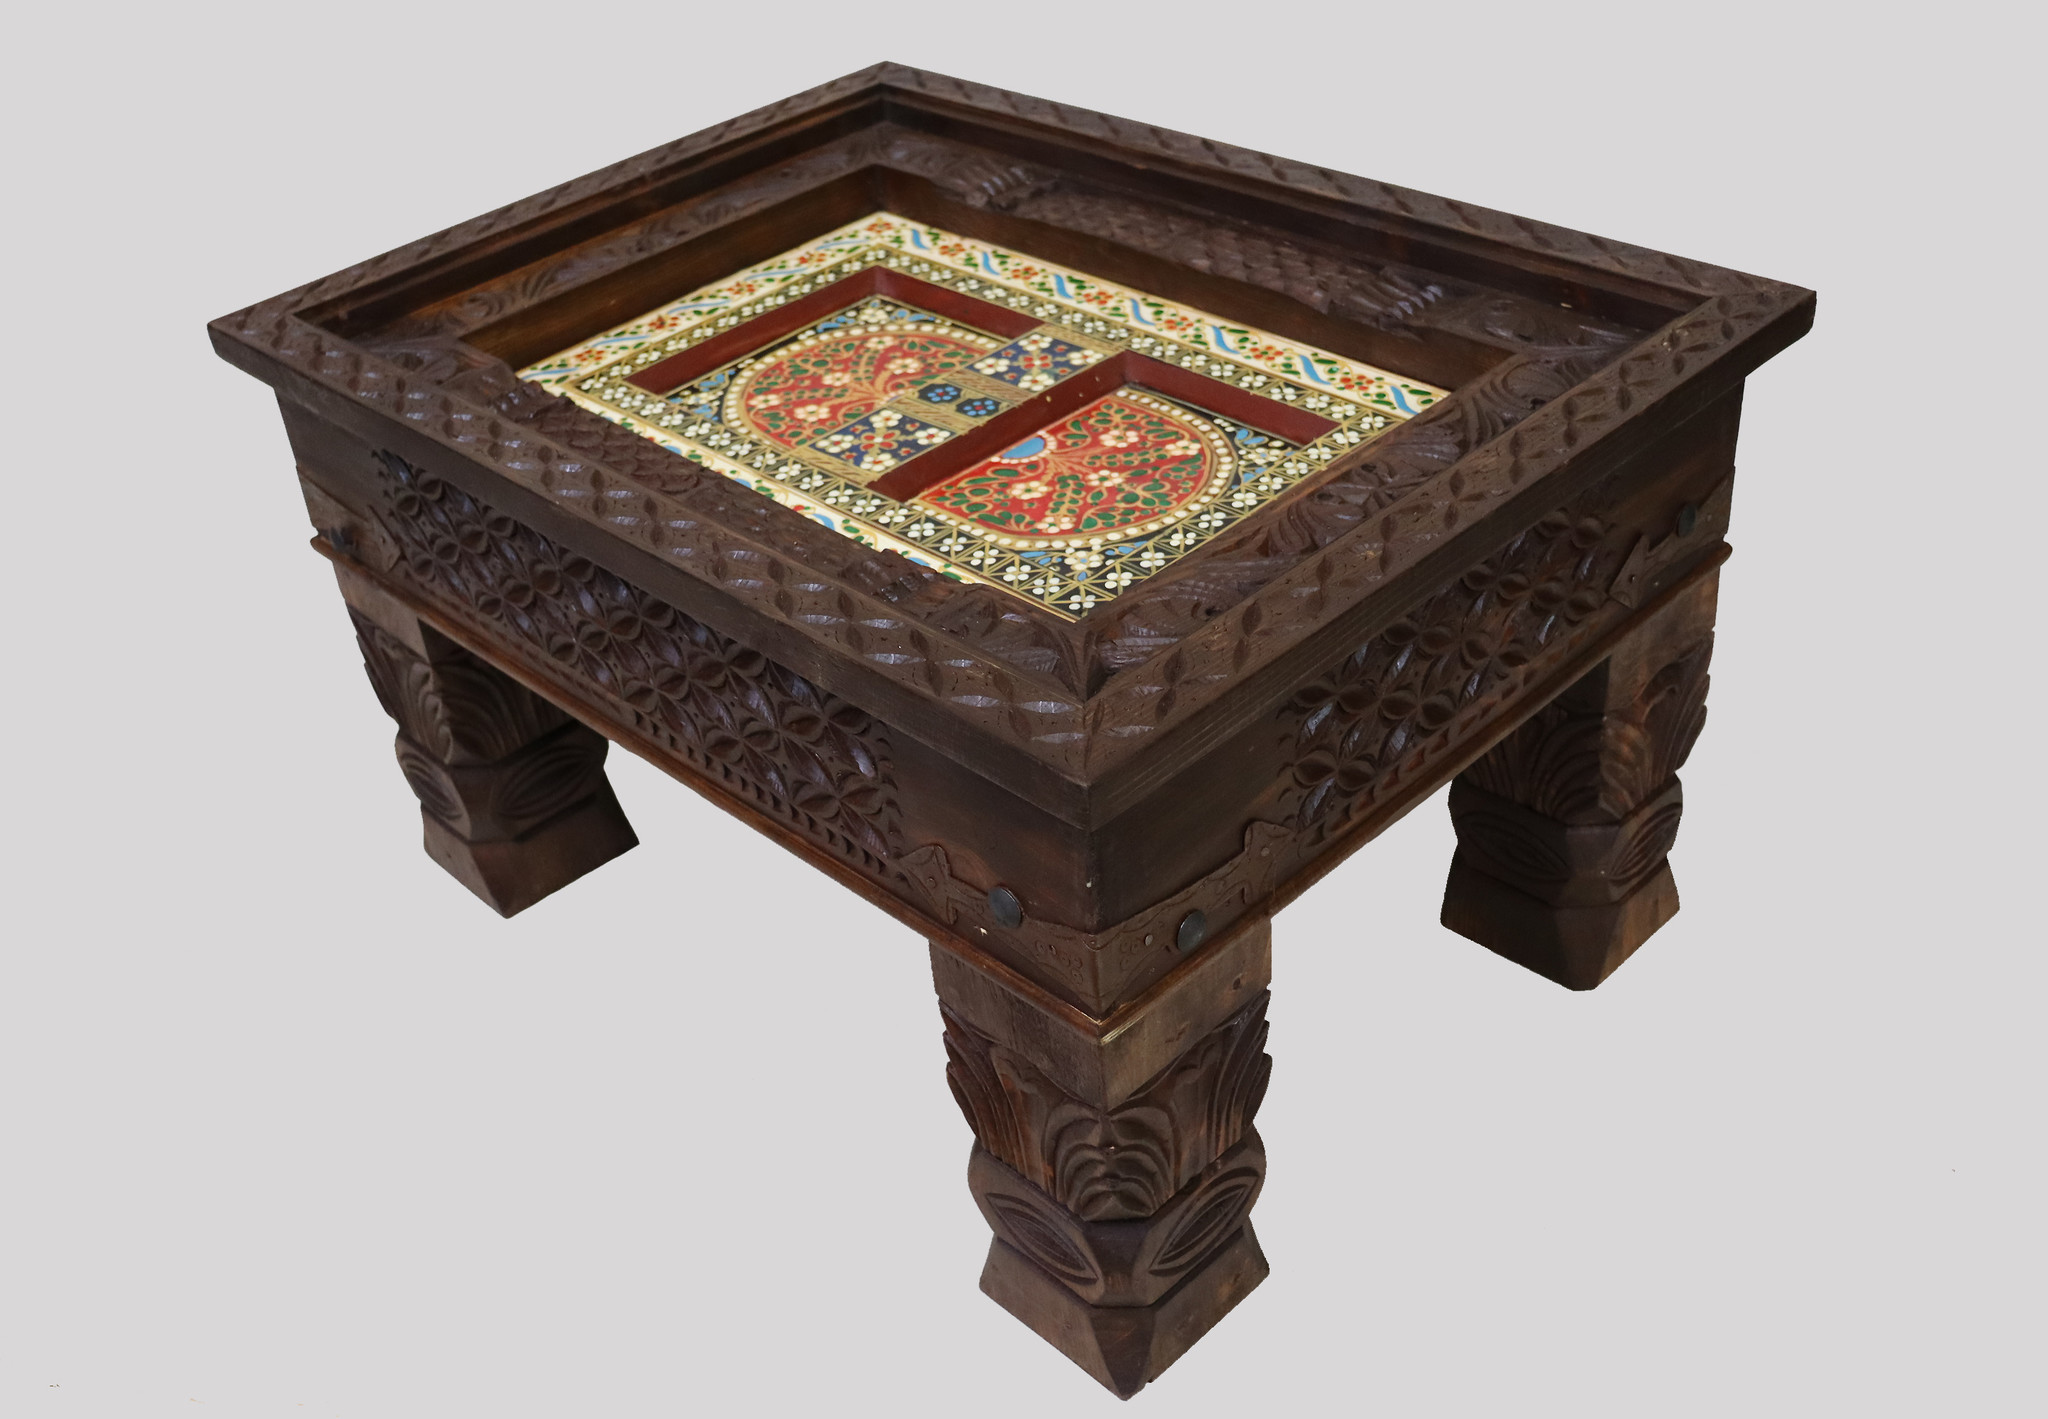 80x60 cm cm antique-look orient colonial solid wood hand-carved  table  Coffee Table   from Afghanistan nuristan 23-4